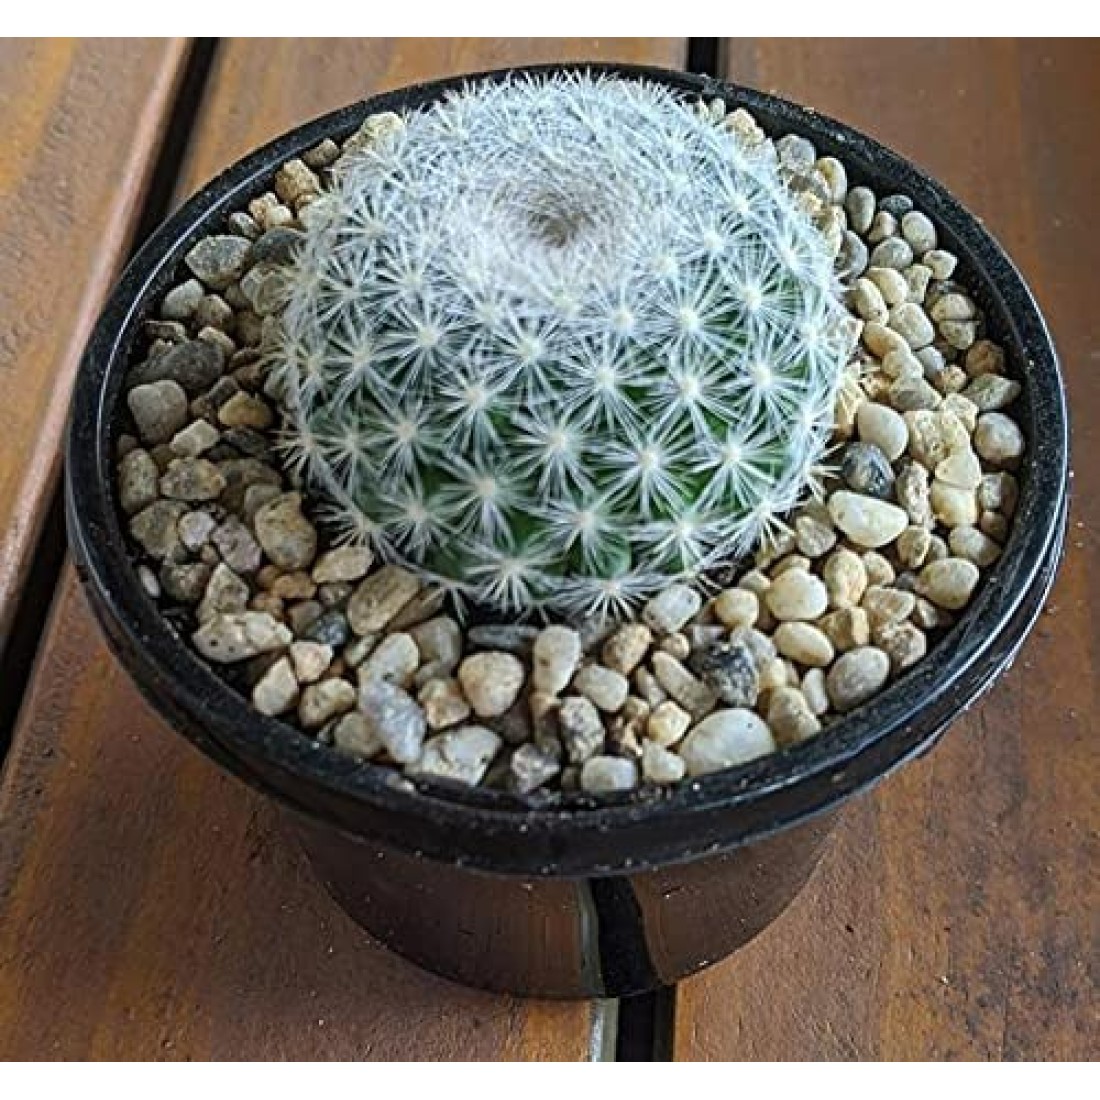 Mammillaria candida (SNOWBALL) cactus live plant ( size 3 inches) flowering size 2